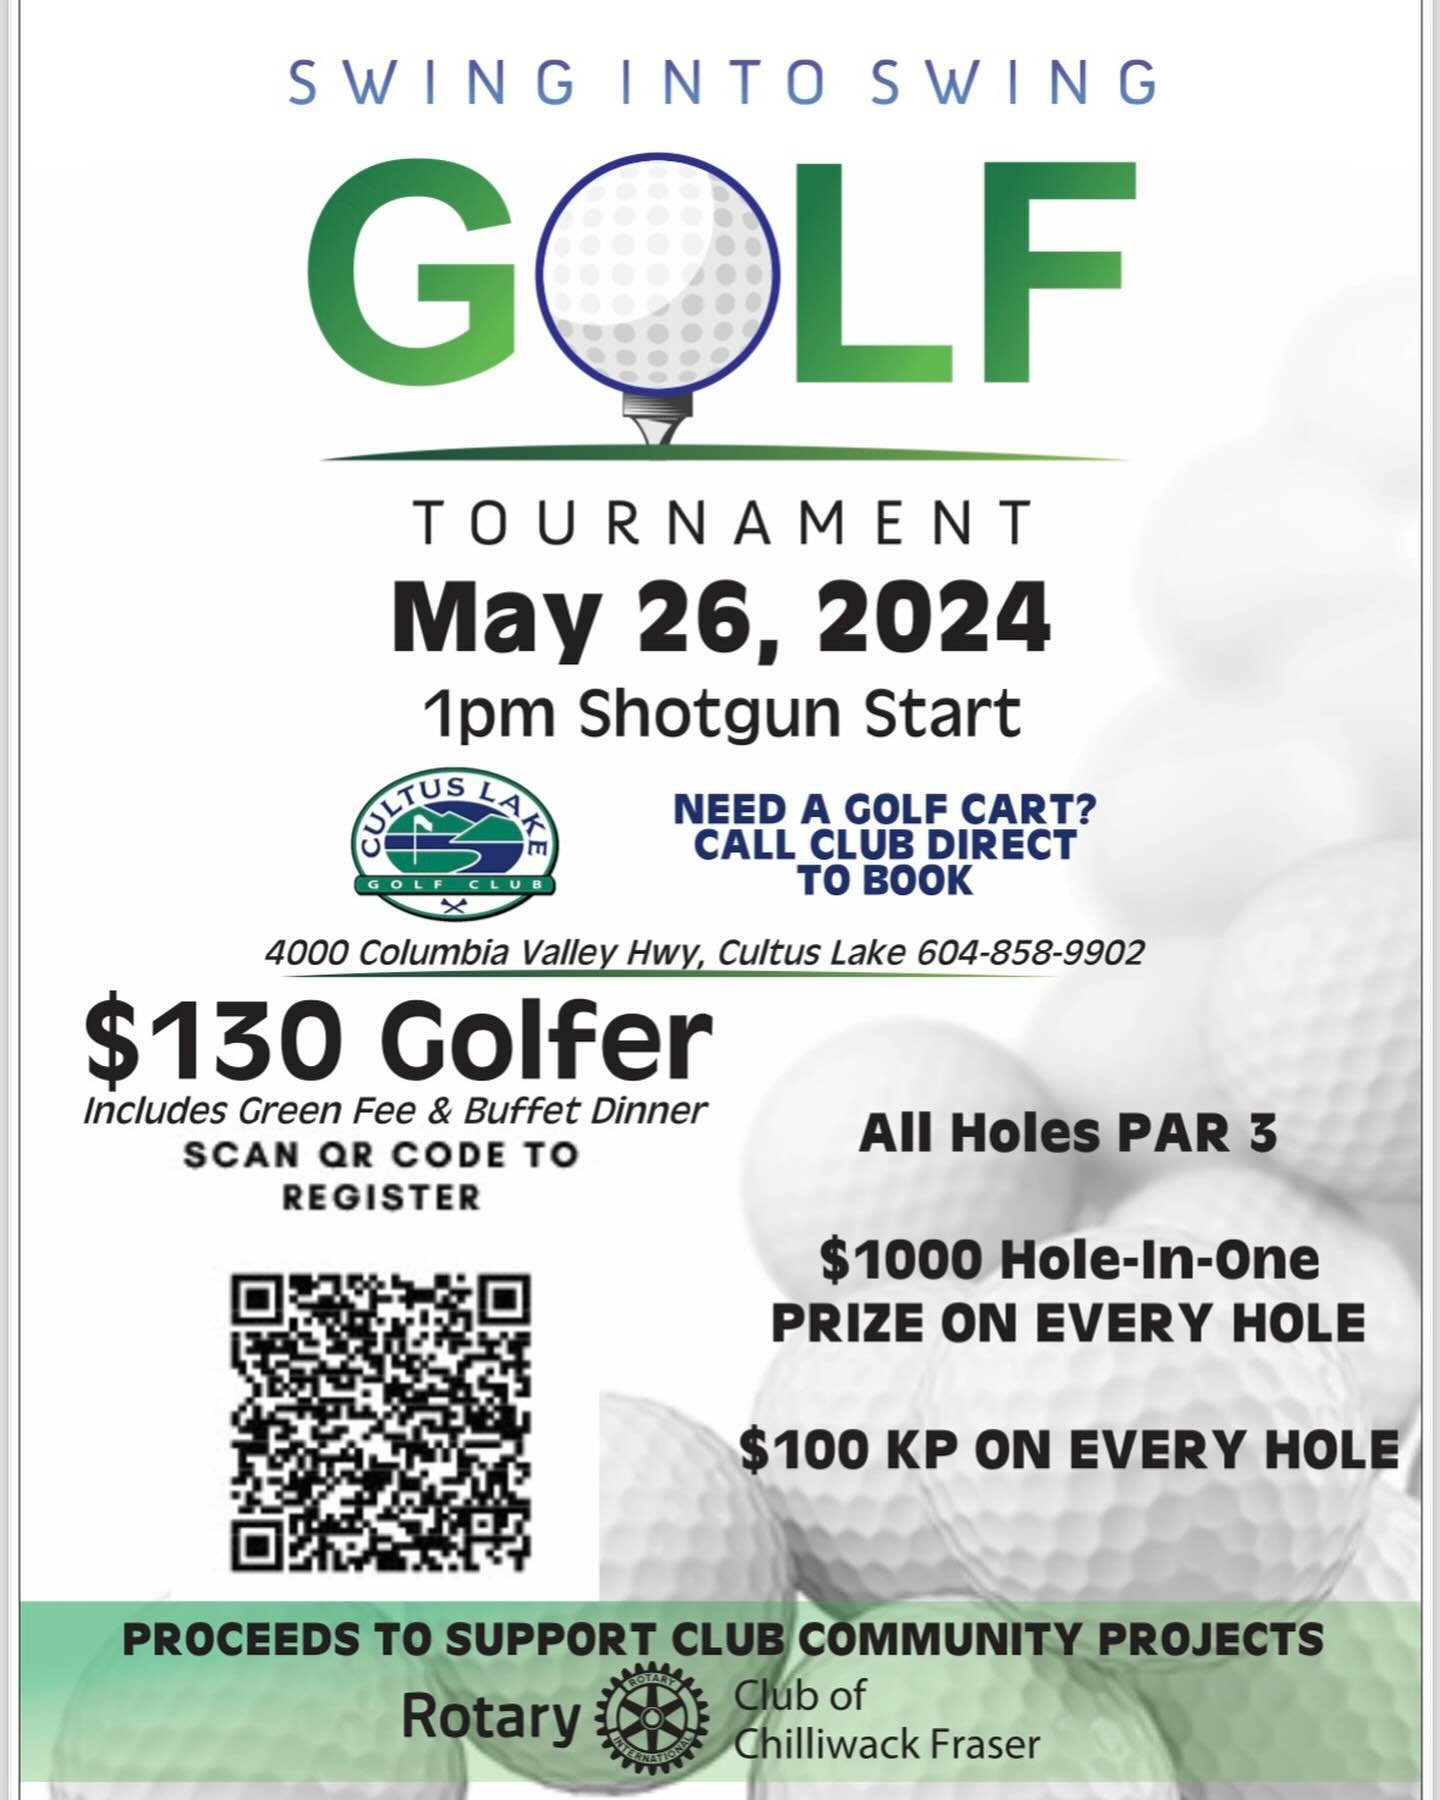 If you want to support a wonderful community organization and also enjoy a day of fun sign up for the Rotary Club of Chilliwack Fraser&rsquo;s annual golf tournament! 

Happening Sunday, May 26th at the @cultuslakegolfclub 

Proceeds go to the club t